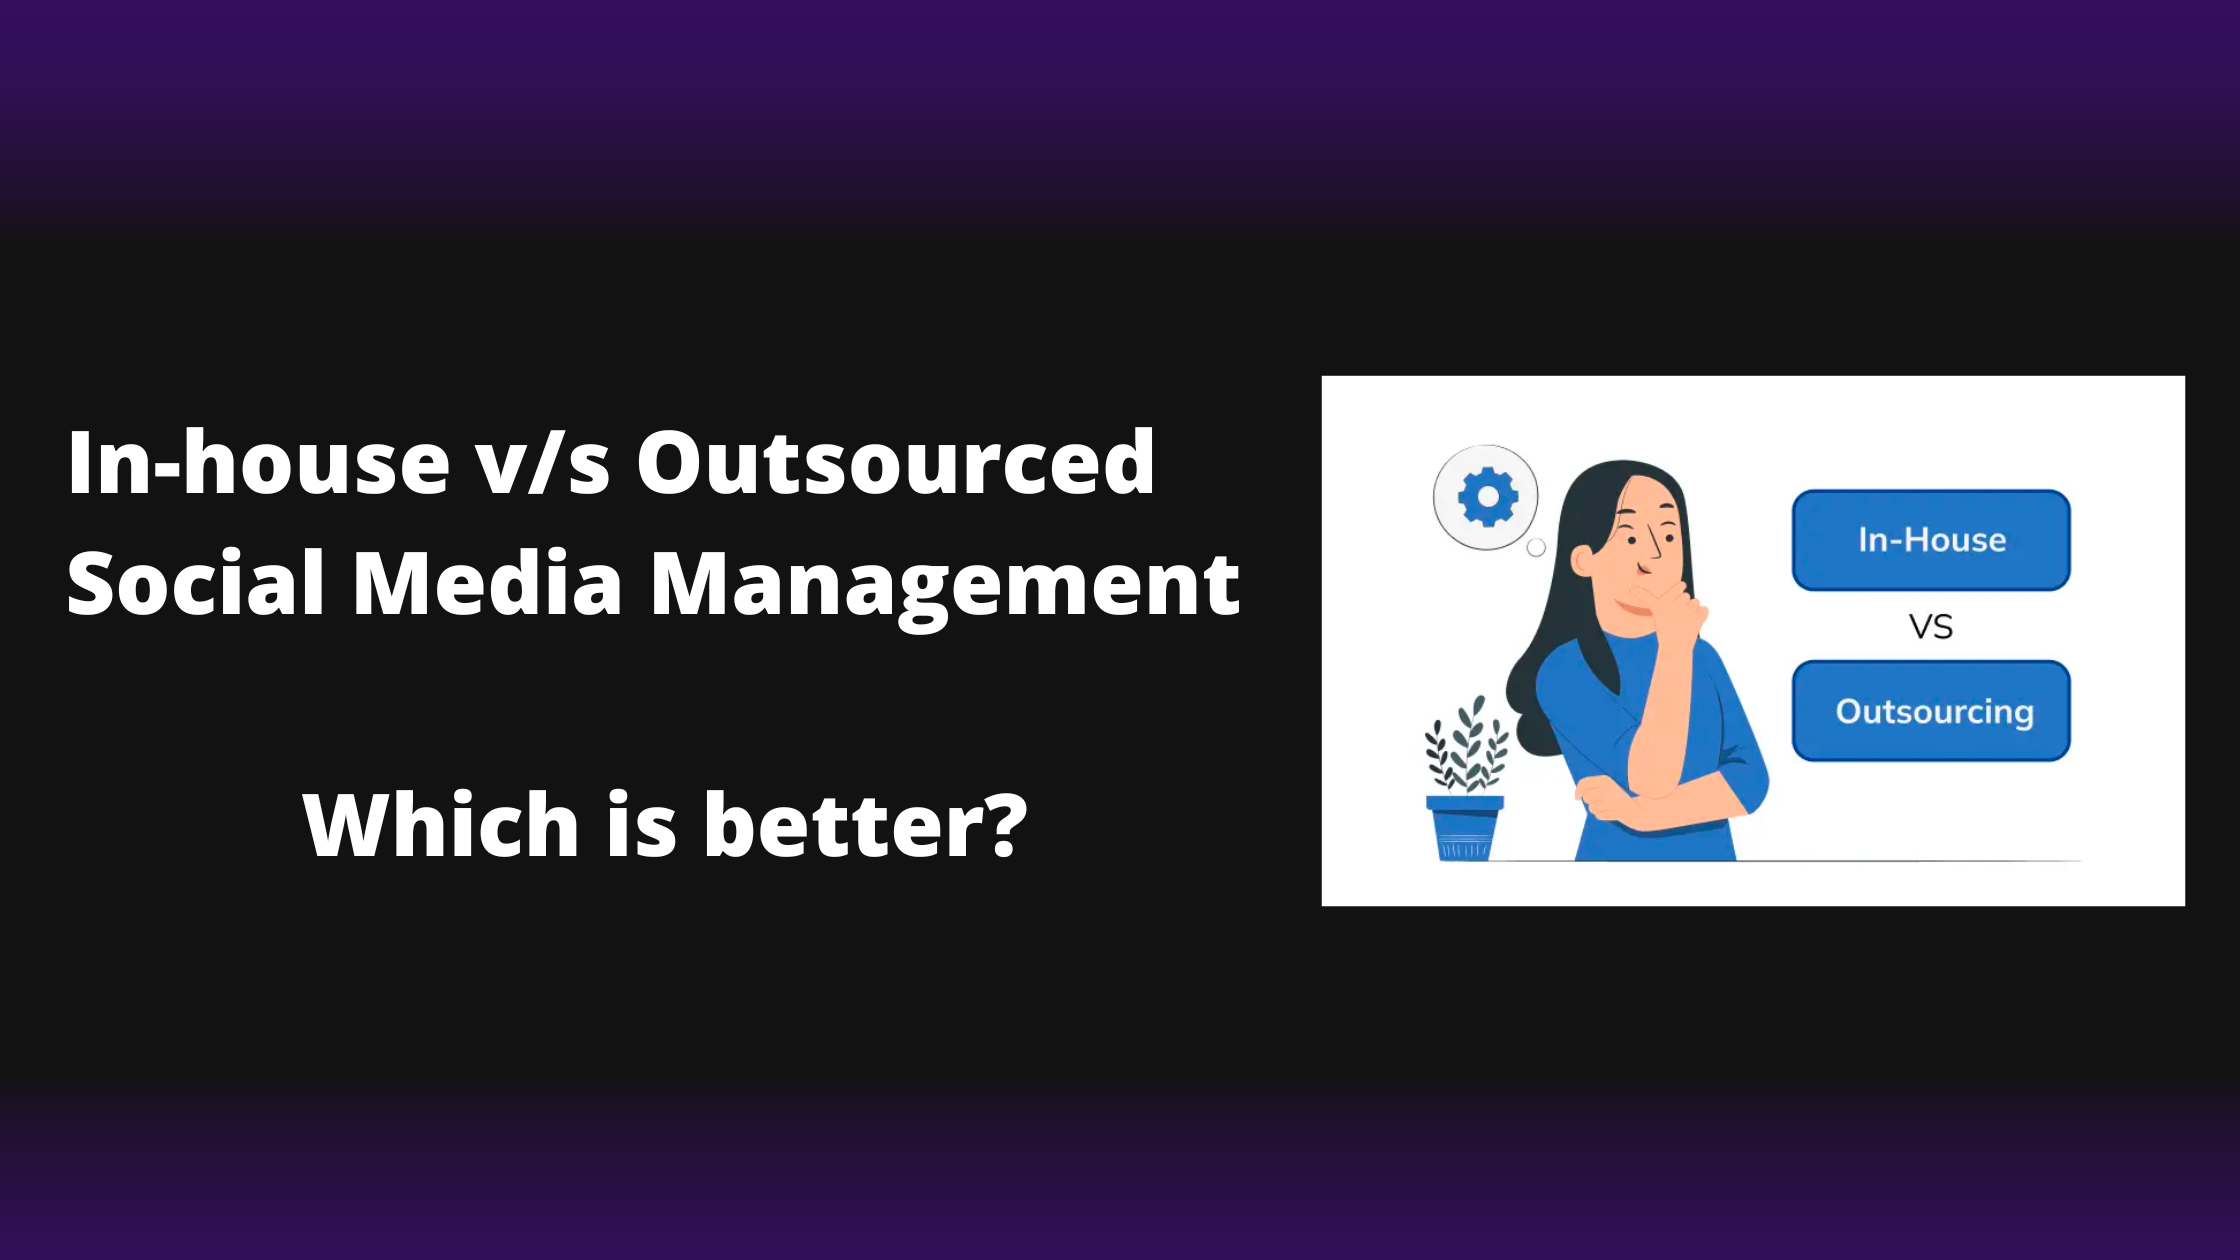 In-house v/s Outsourced social media management – Which is better?